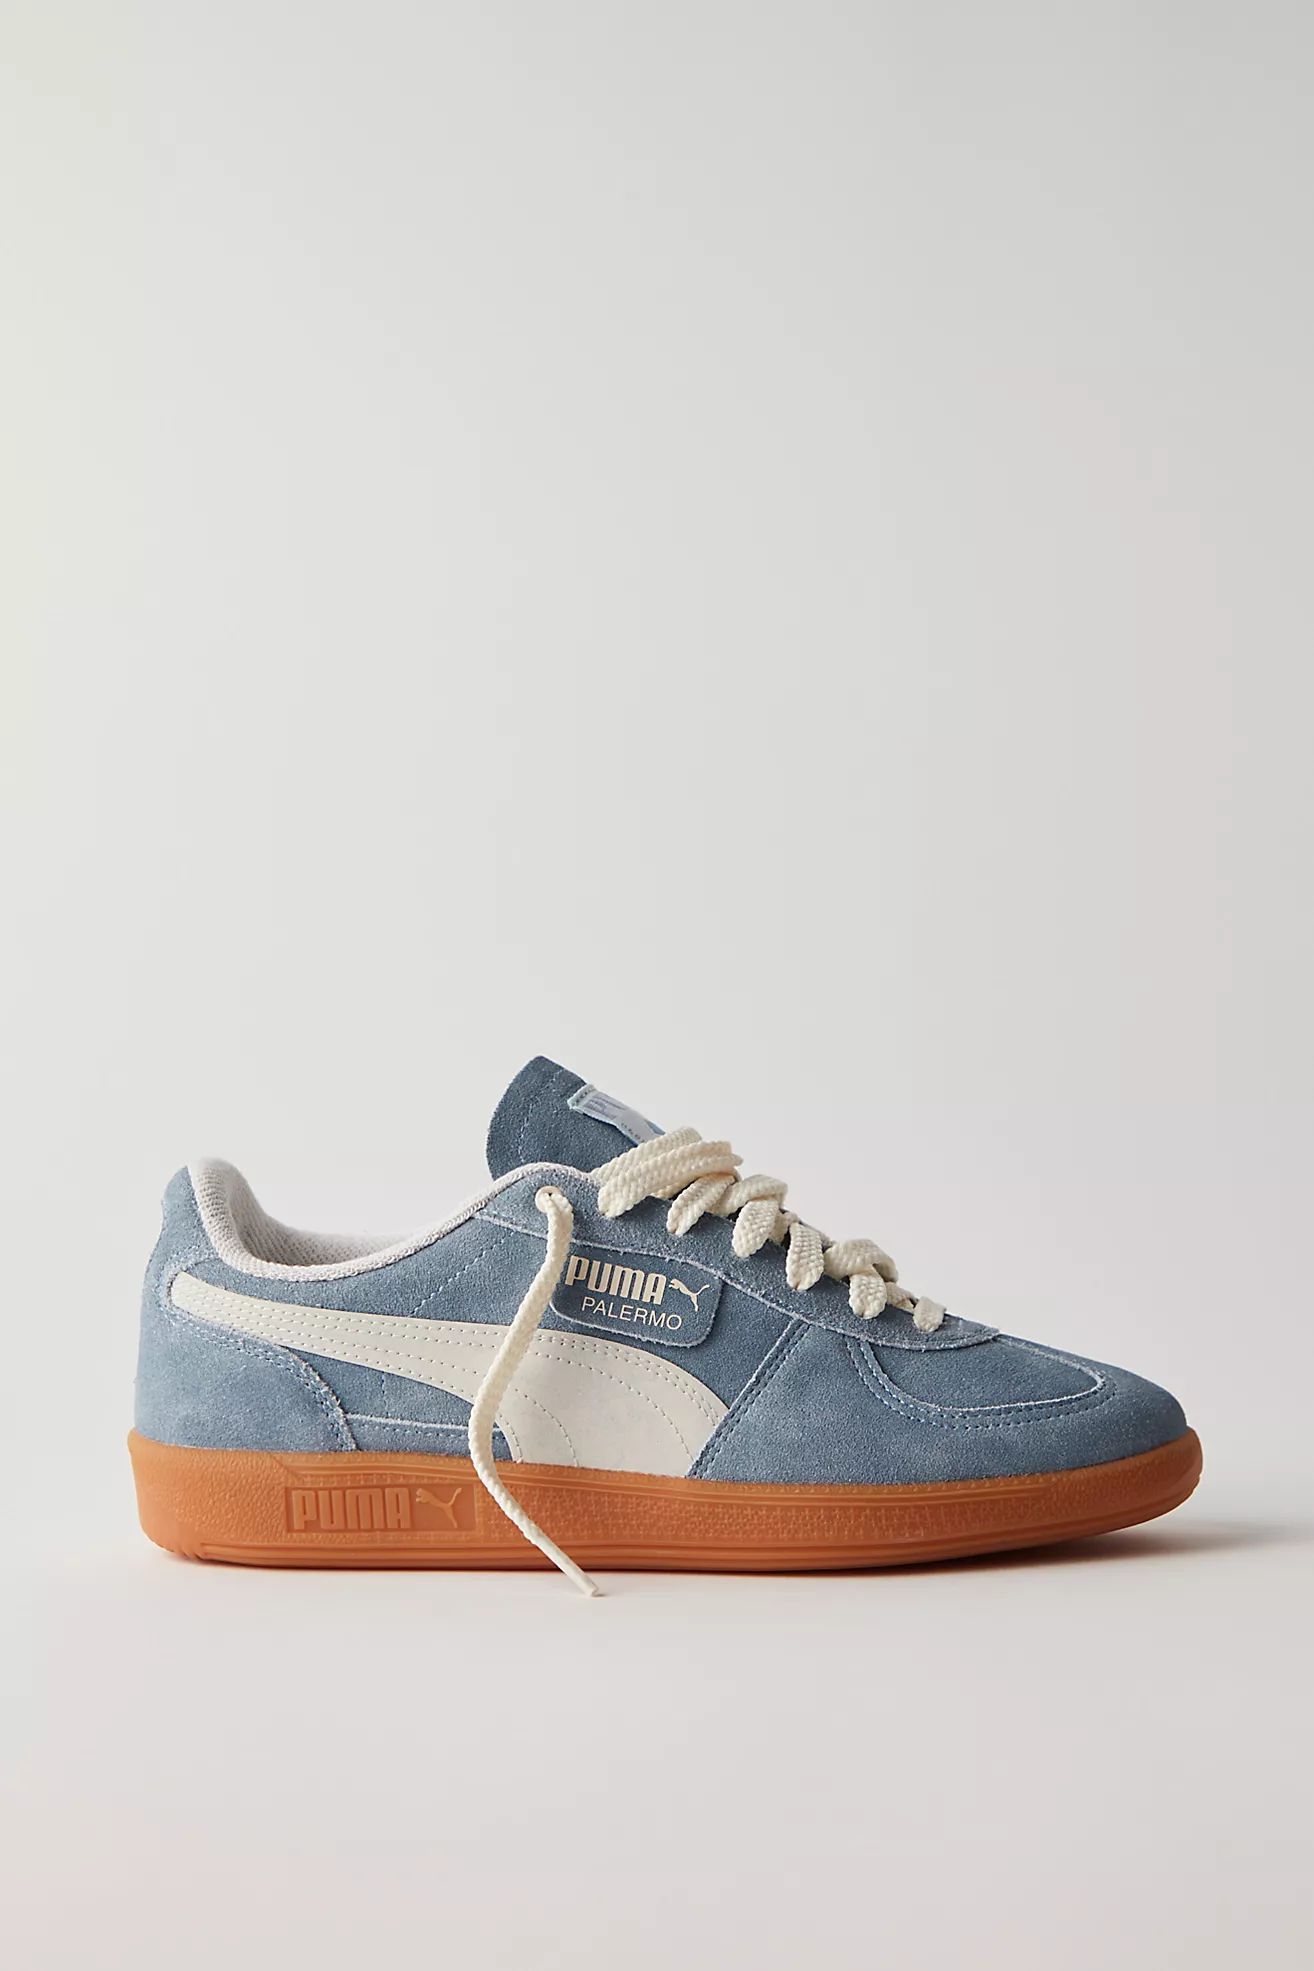 Puma Palermo Basketball Nostalgia Sneakers | Free People (Global - UK&FR Excluded)